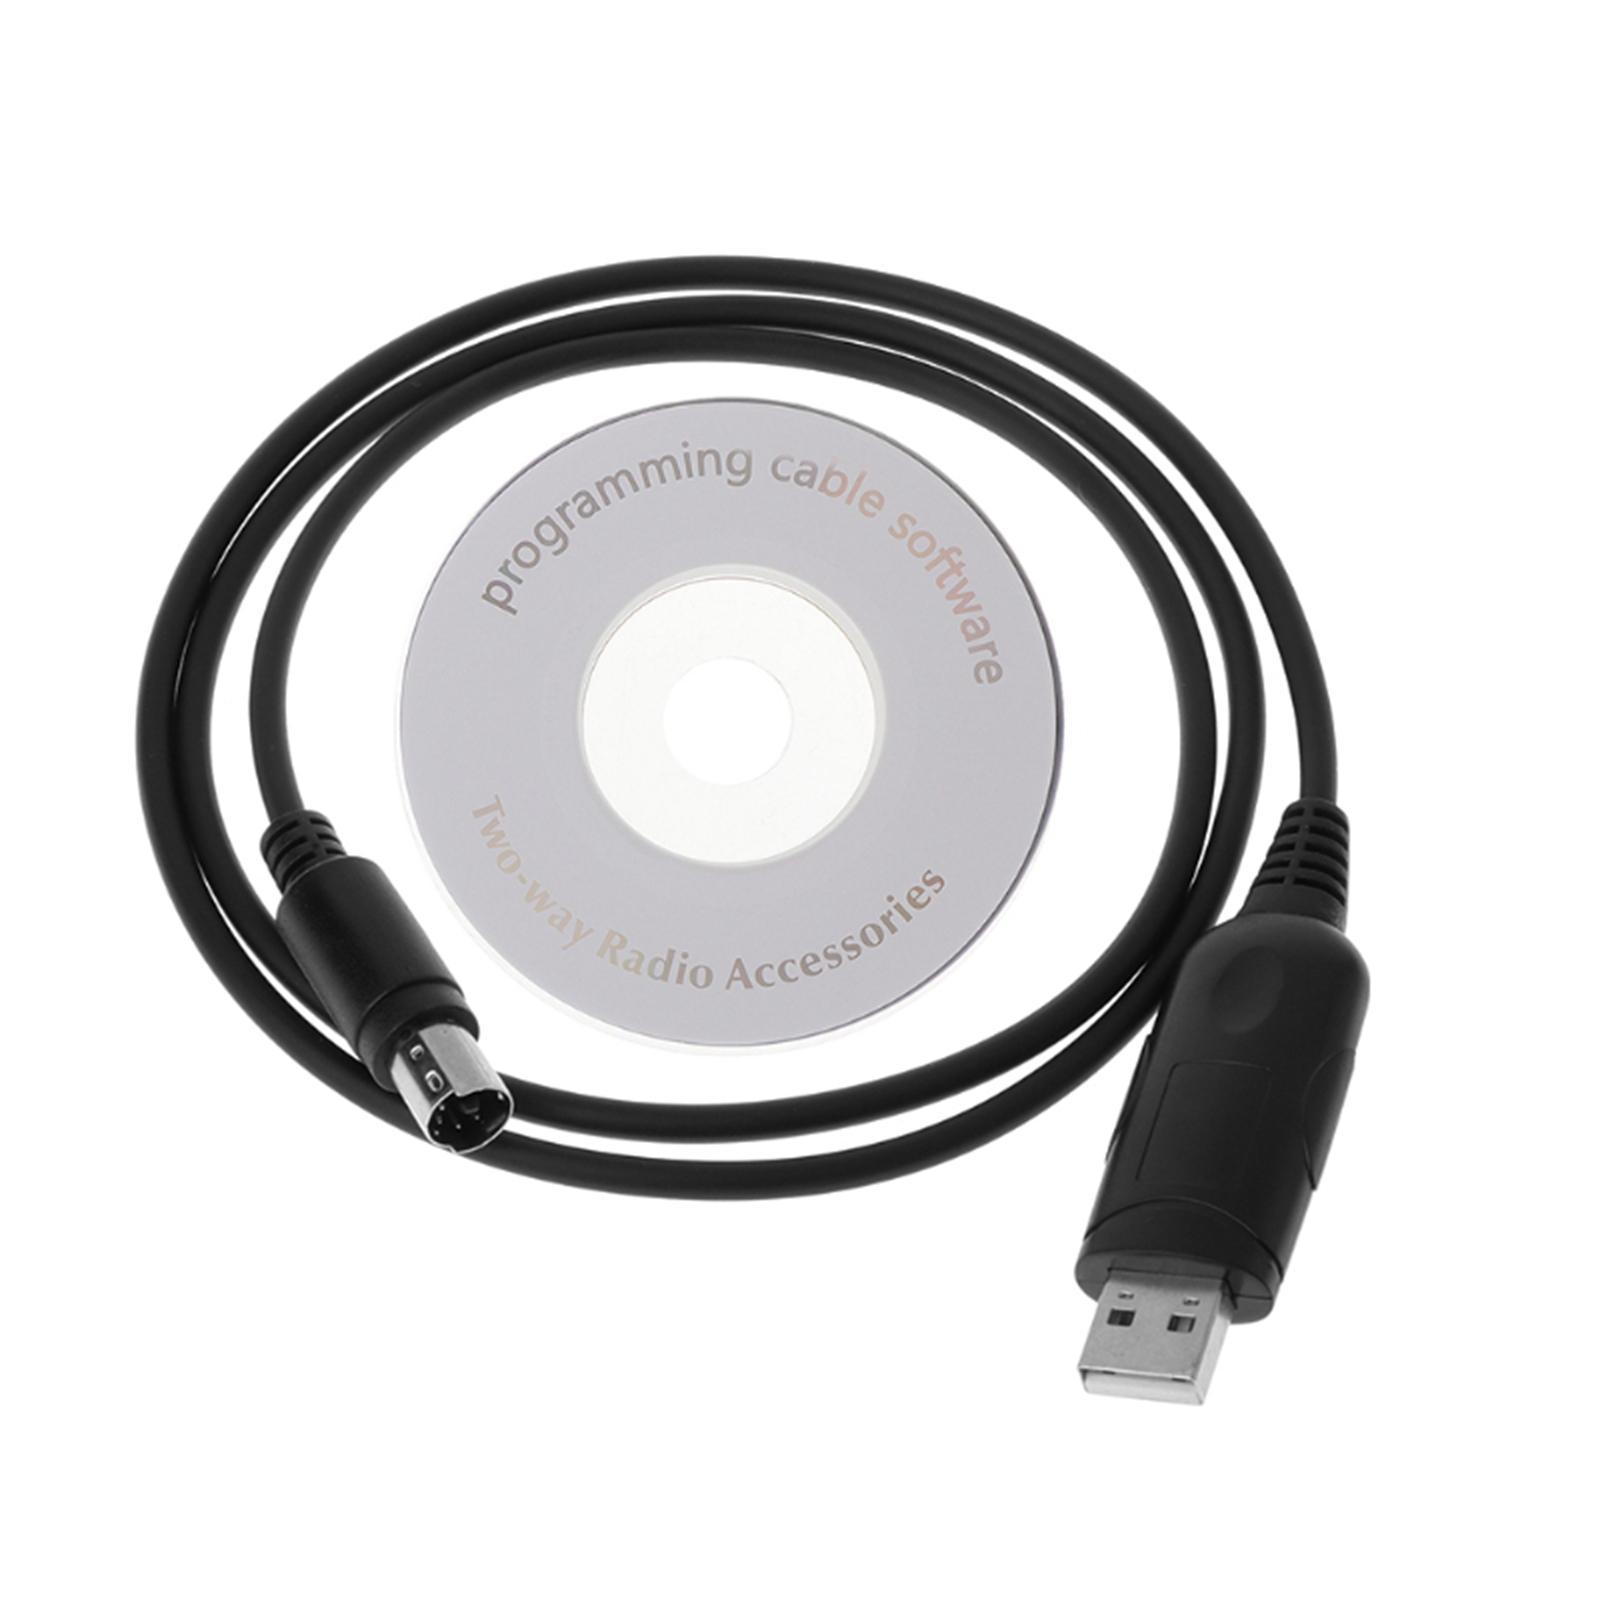 USB Programming Cable 1M/3.28ft for  ft-8800R Durable Accessories